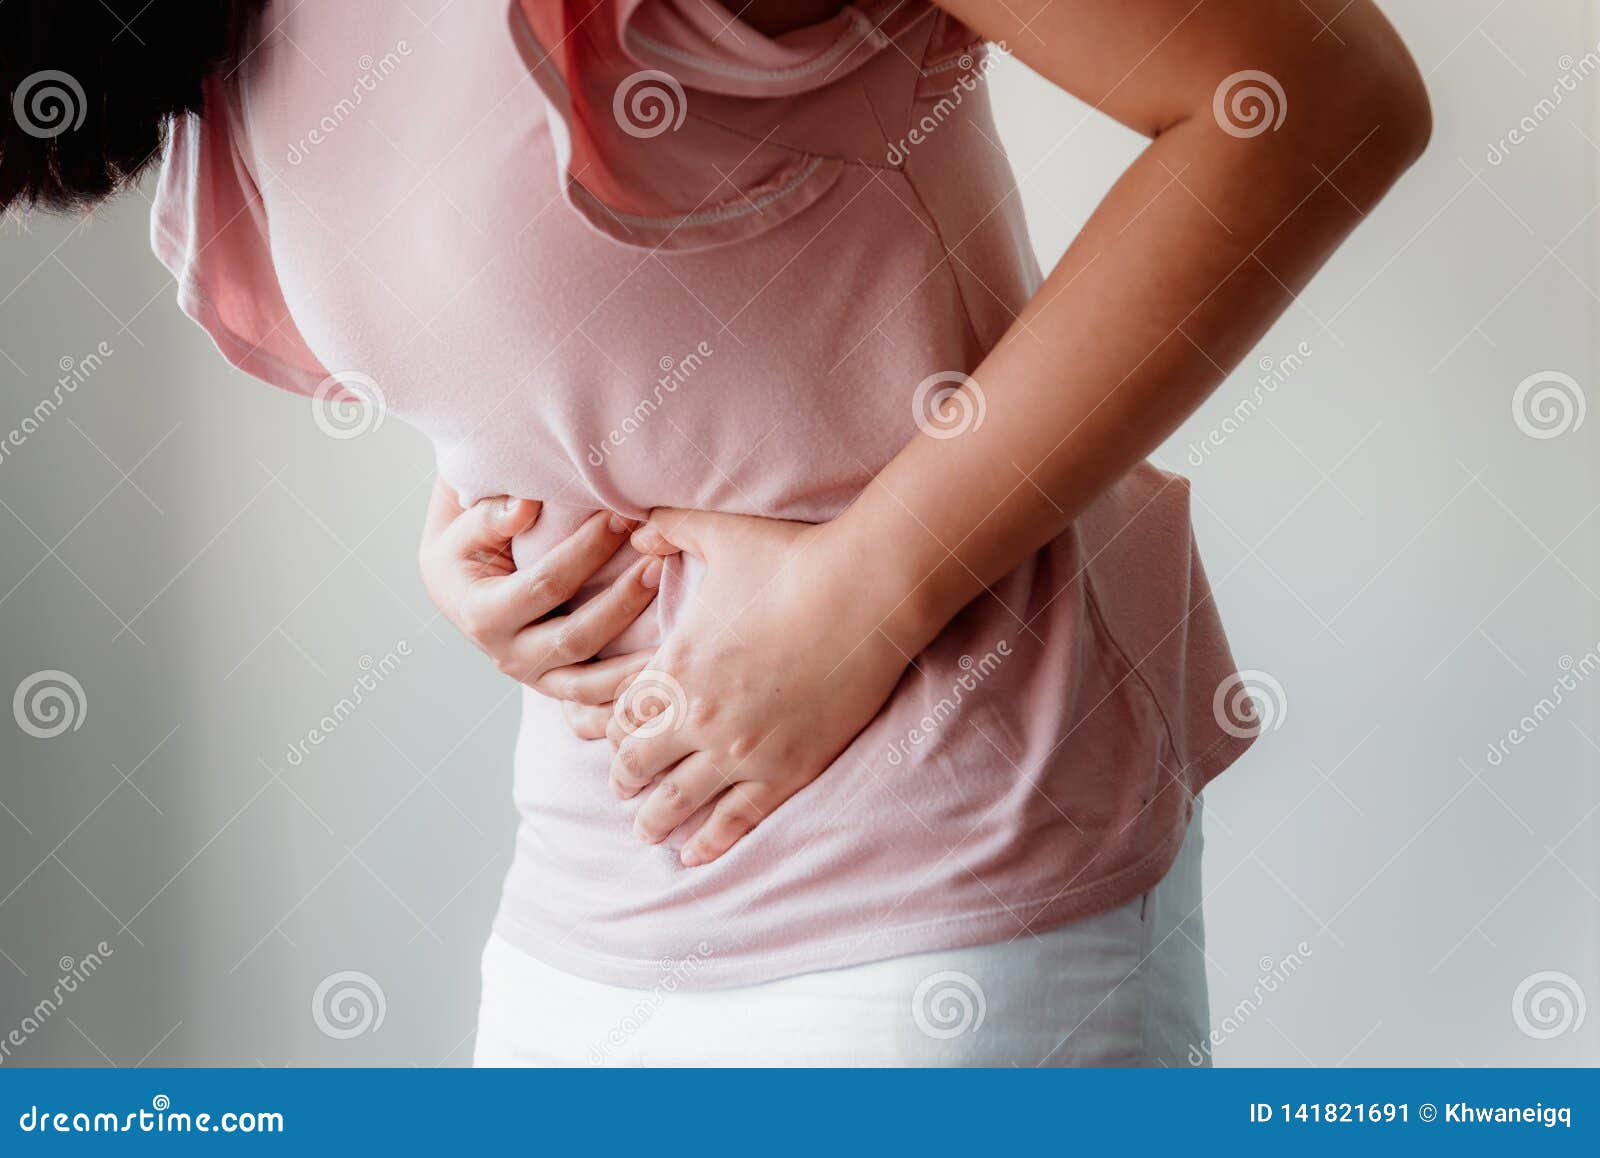 woman is having stomach ache or menstrual period, close-up portrait of young woman is suffering from abdominal pain at her home.